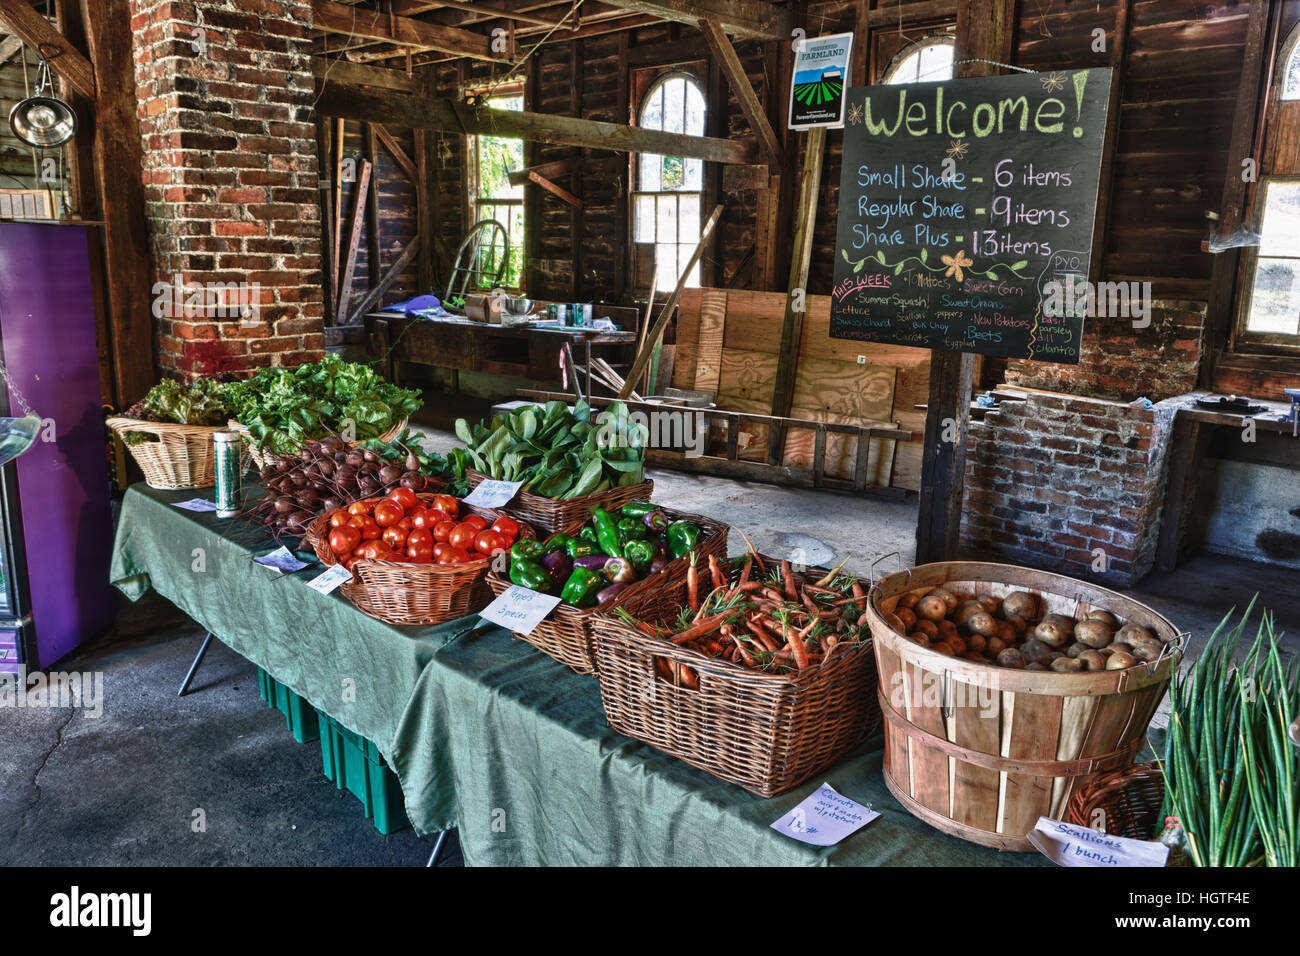 Die Community Supported Agriculture (CSA) Abholung im Crimson und Klee Farm in Northampton, Massachusetts. HDR Stockfoto